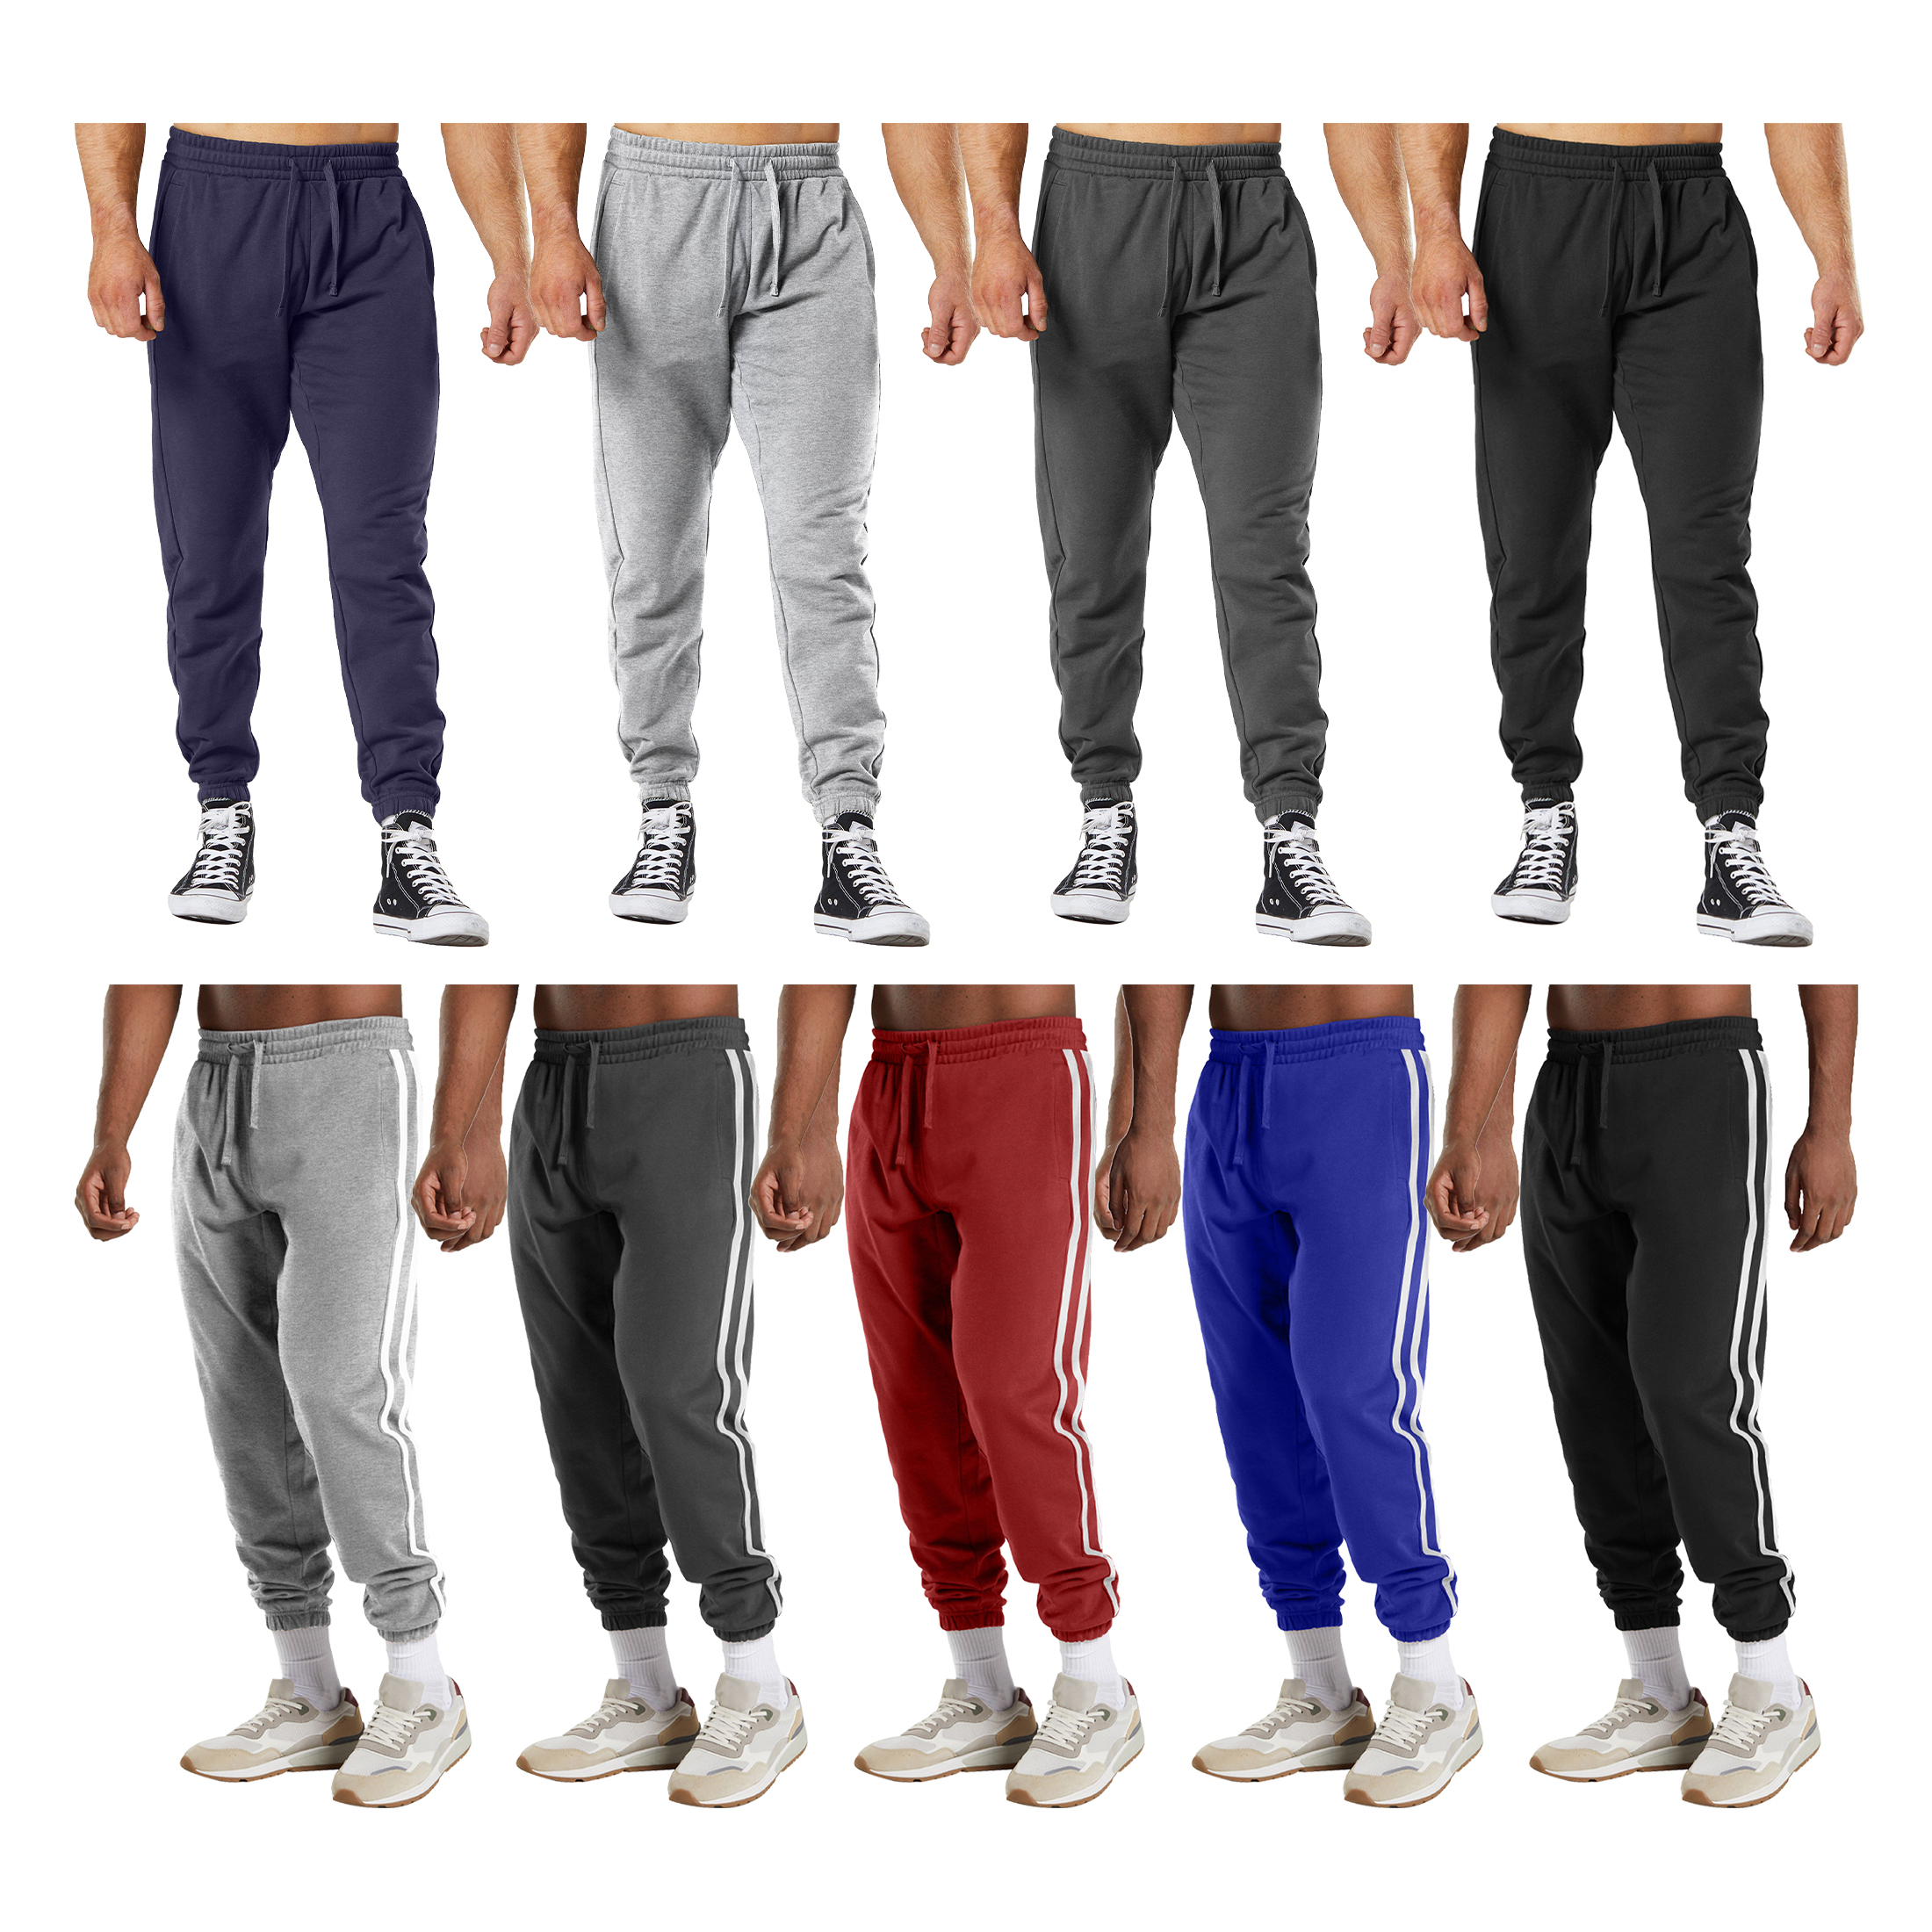 3-Pack: Men's Casual Fleece-Lined Elastic Bottom Sweatpants Jogger Pants With Pockets - Solid & Stripes, Small